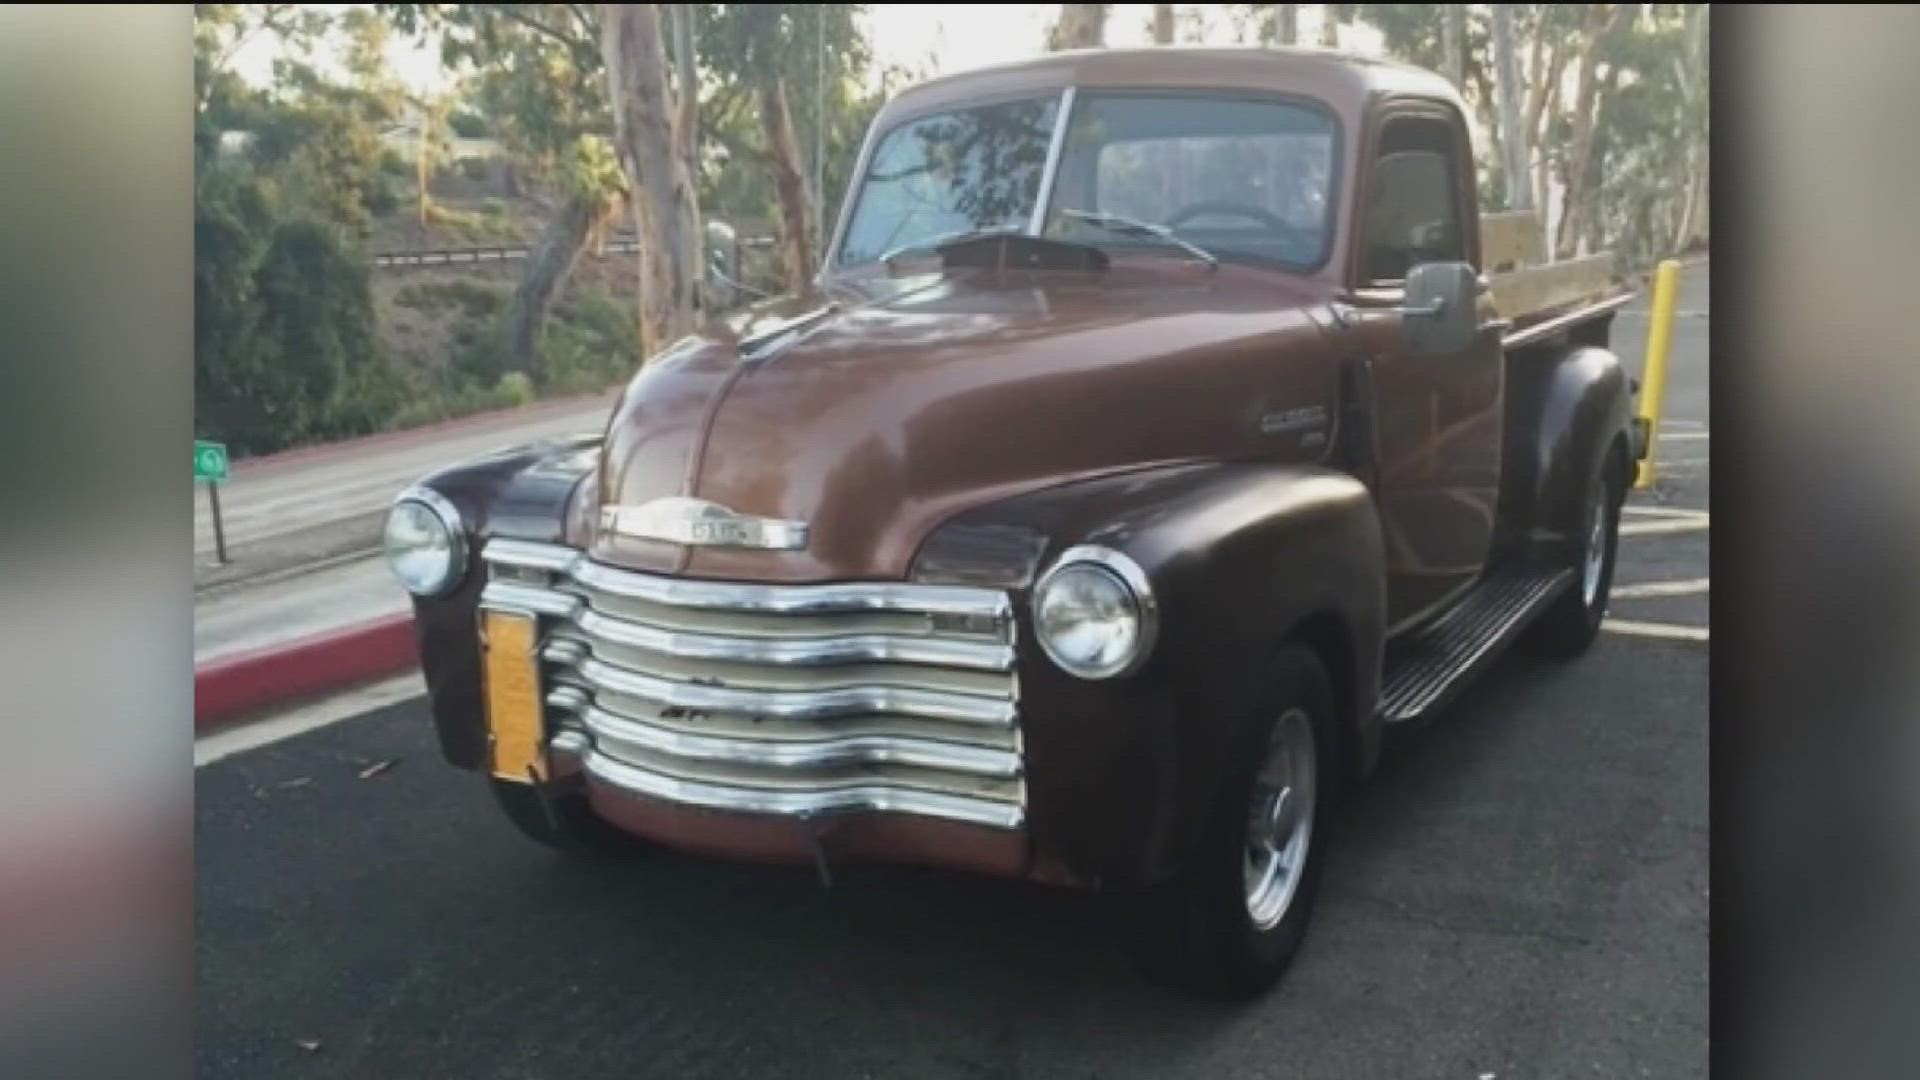 A 1950s pickup truck was taken from a condo parking lot North of Mission Valley.